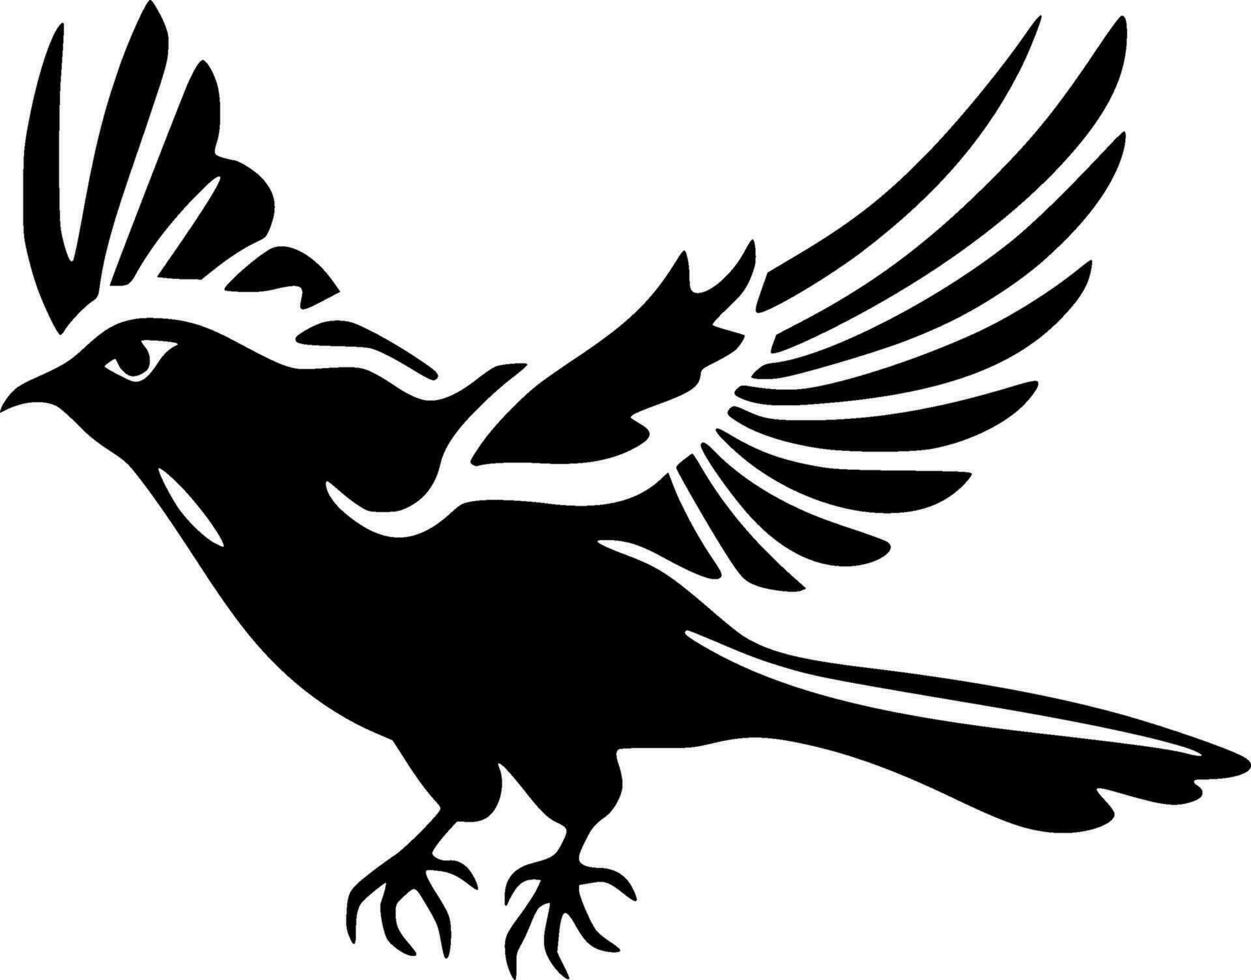 Bird - Black and White Isolated Icon - Vector illustration